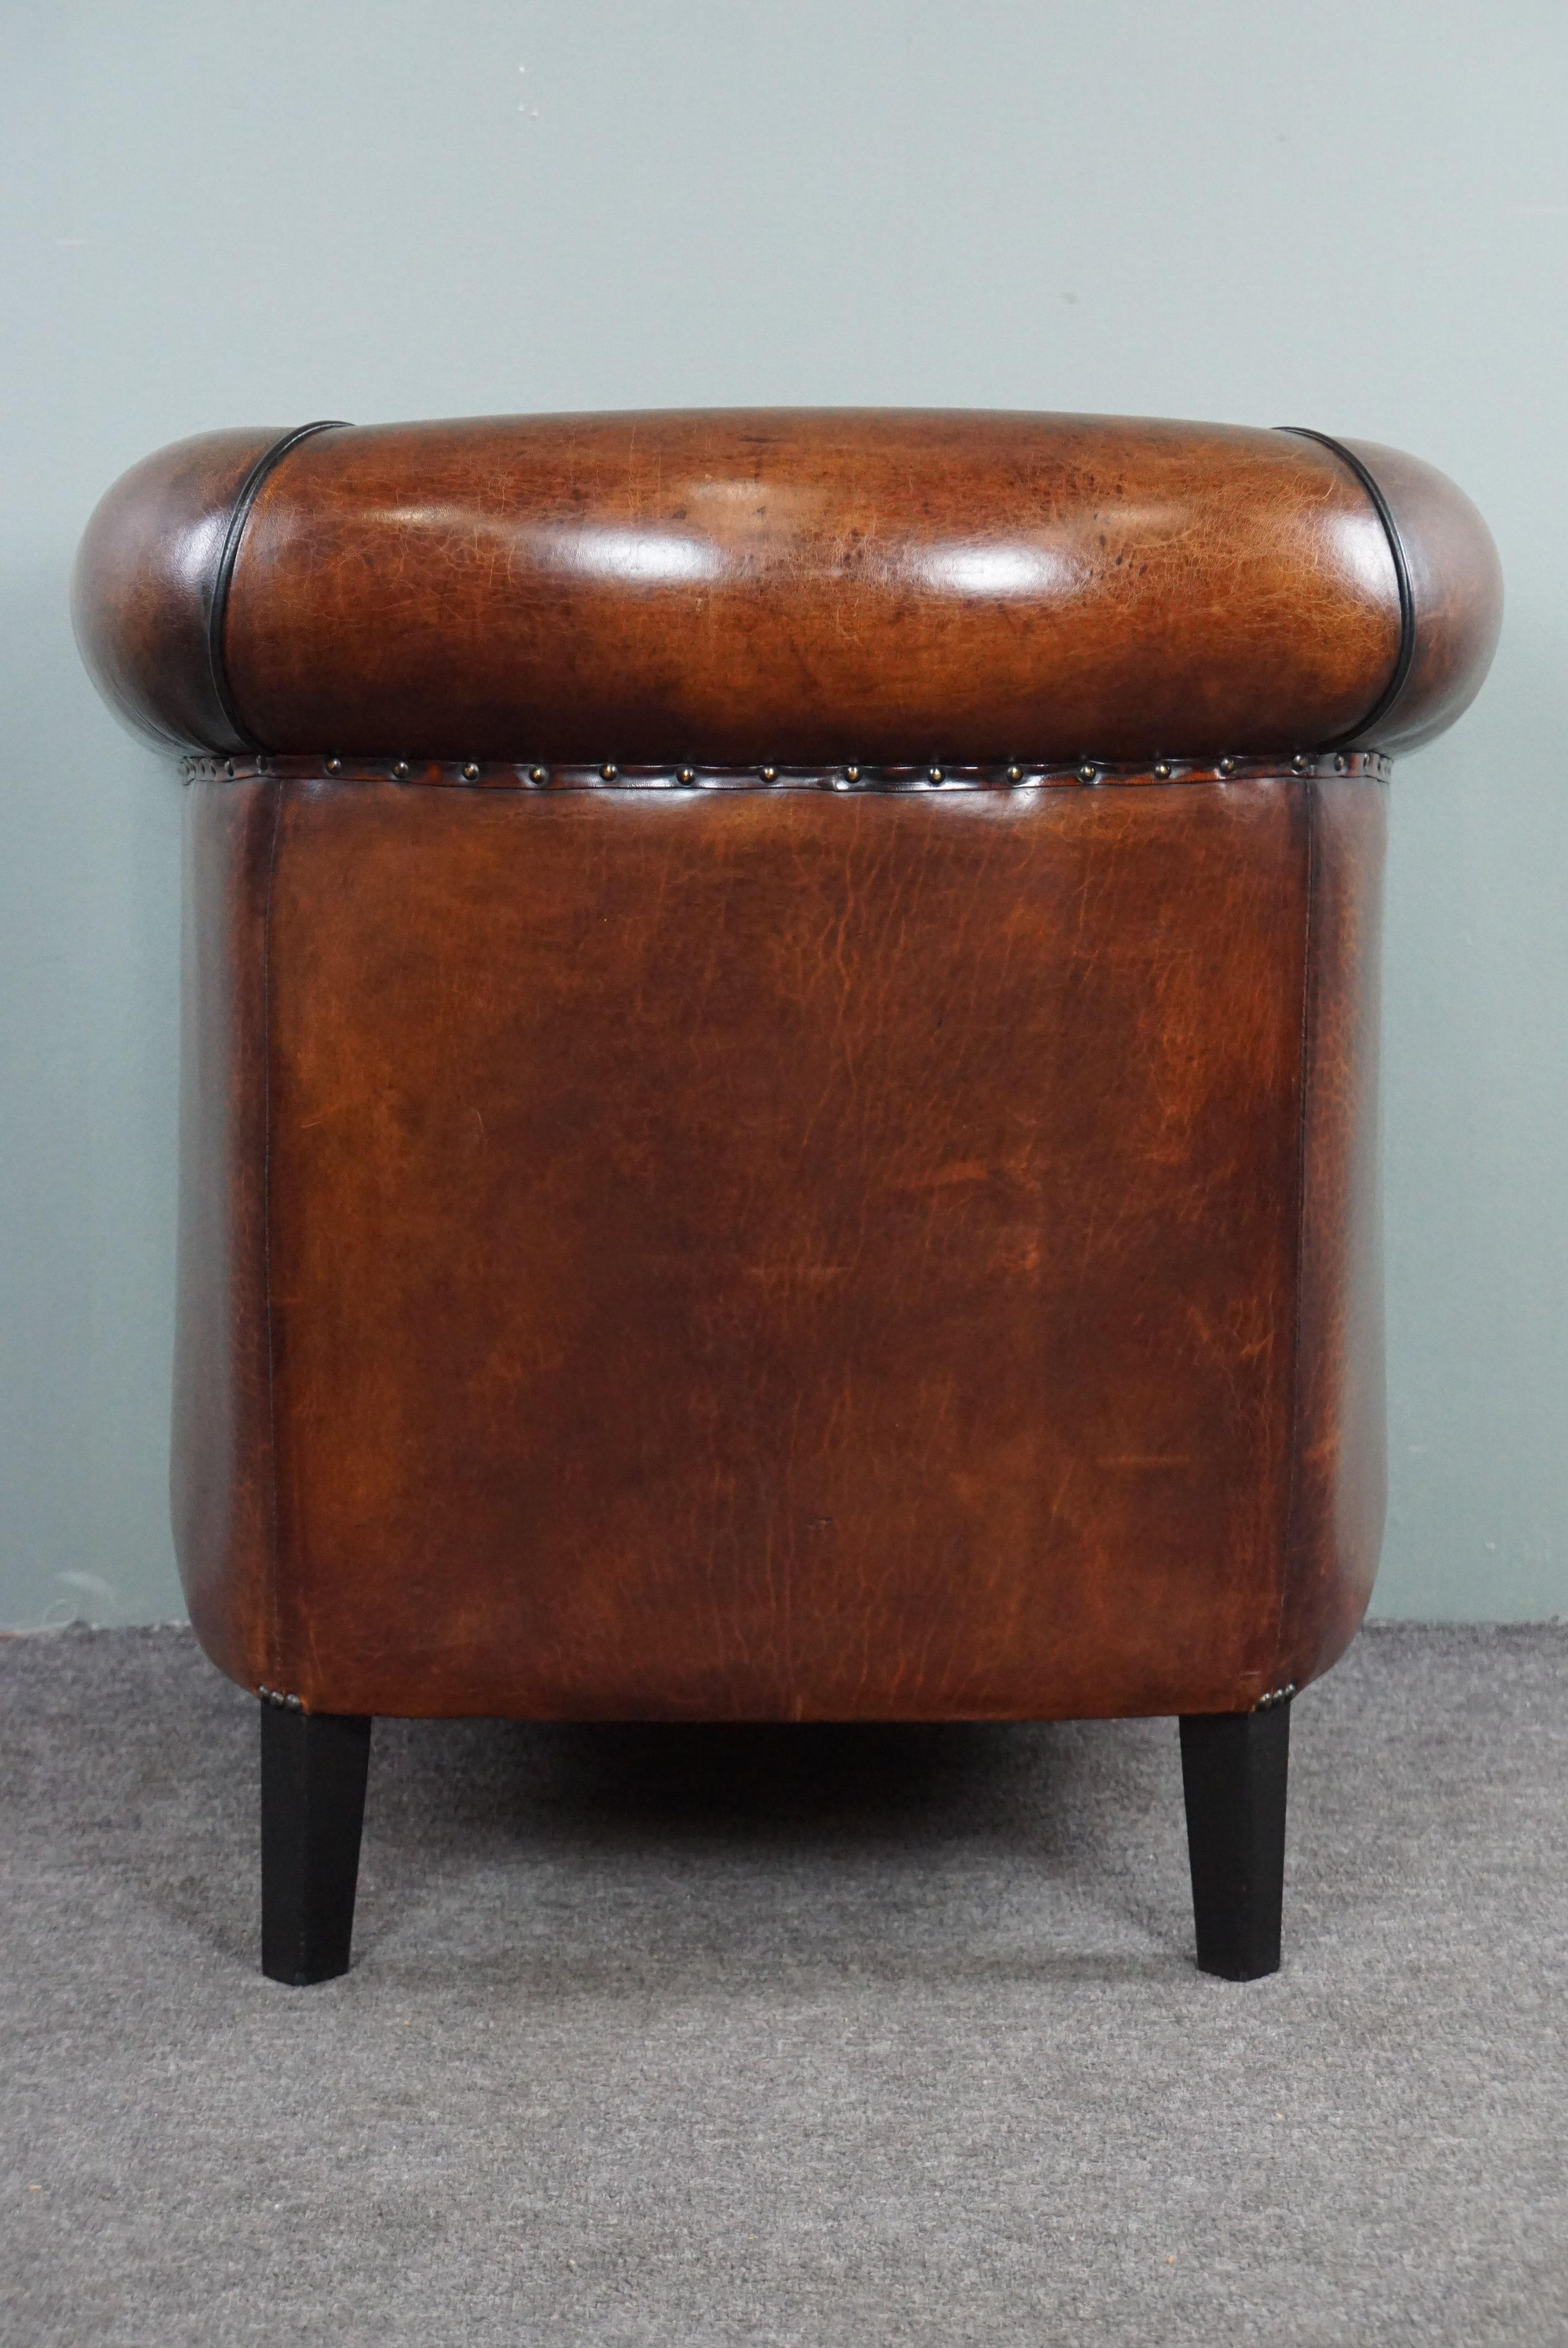 Hand-Crafted Sheep leather club chair with black piping and decorative nails For Sale